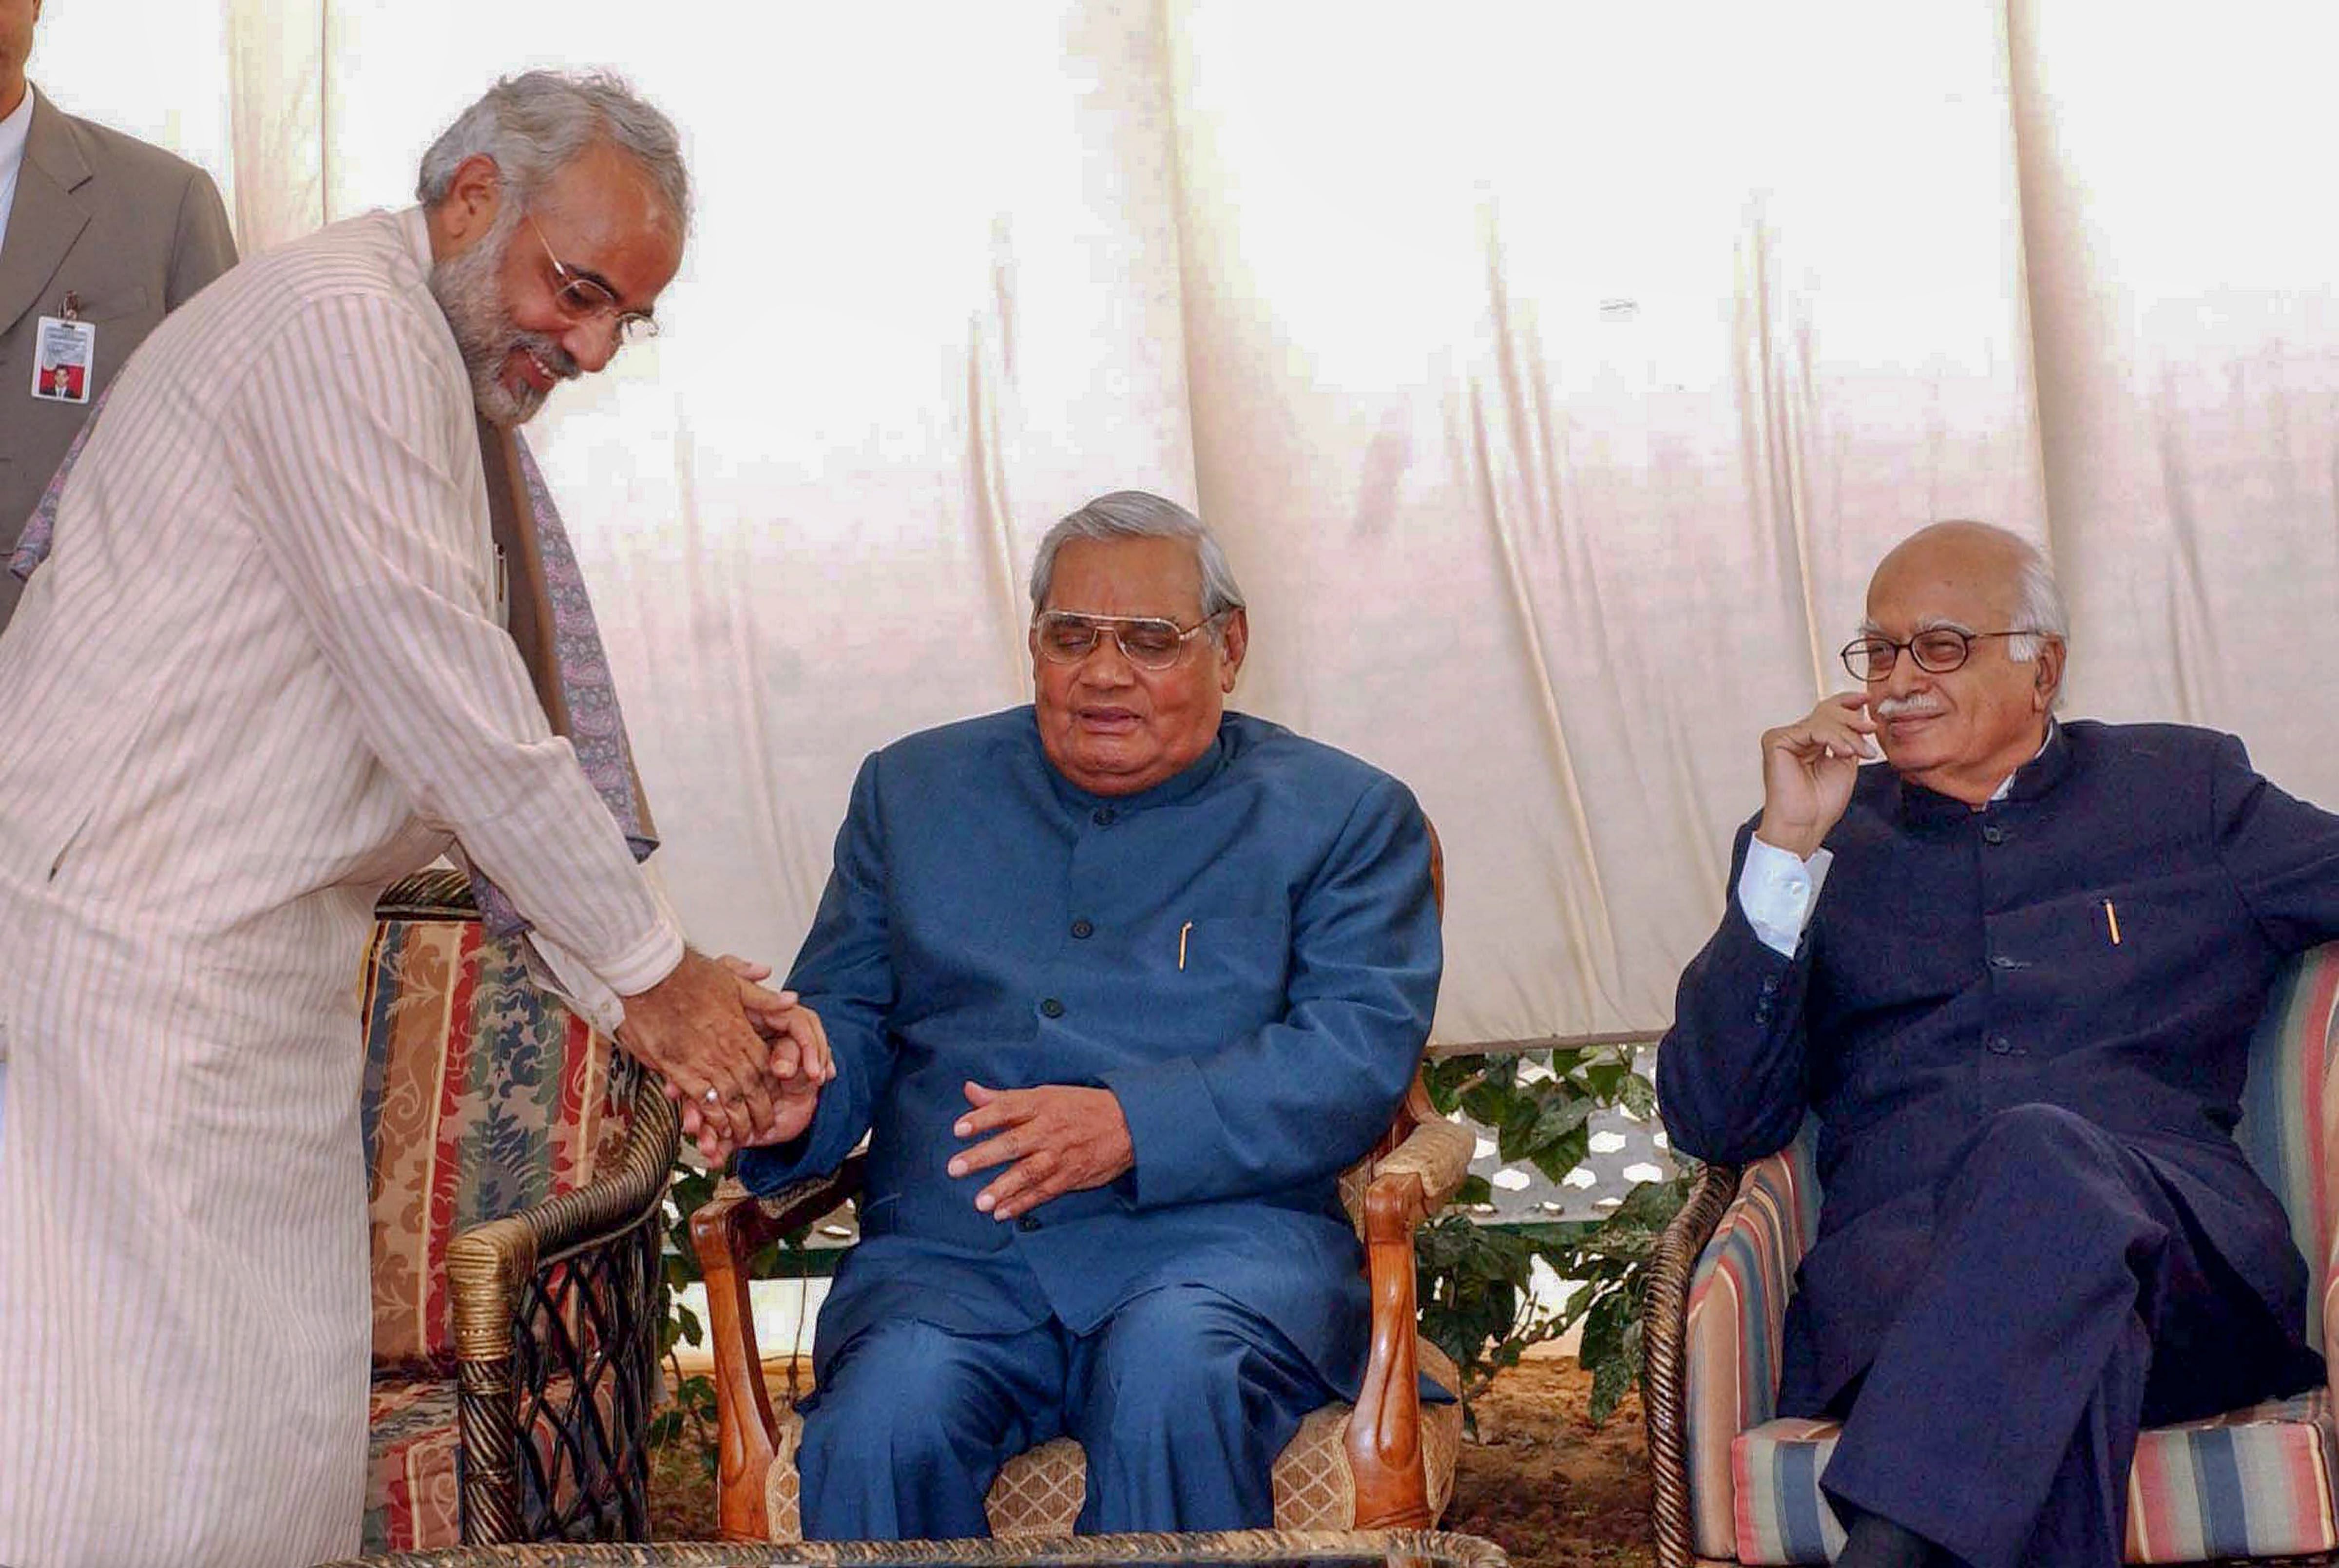 In this December 09, 2003, file photo former prime minister Atal Bihari Vajpayee is seen with the then Gujarat CM Narendra Modi and BJP senior leader LK Advani at a lunch in New Delhi. PTI